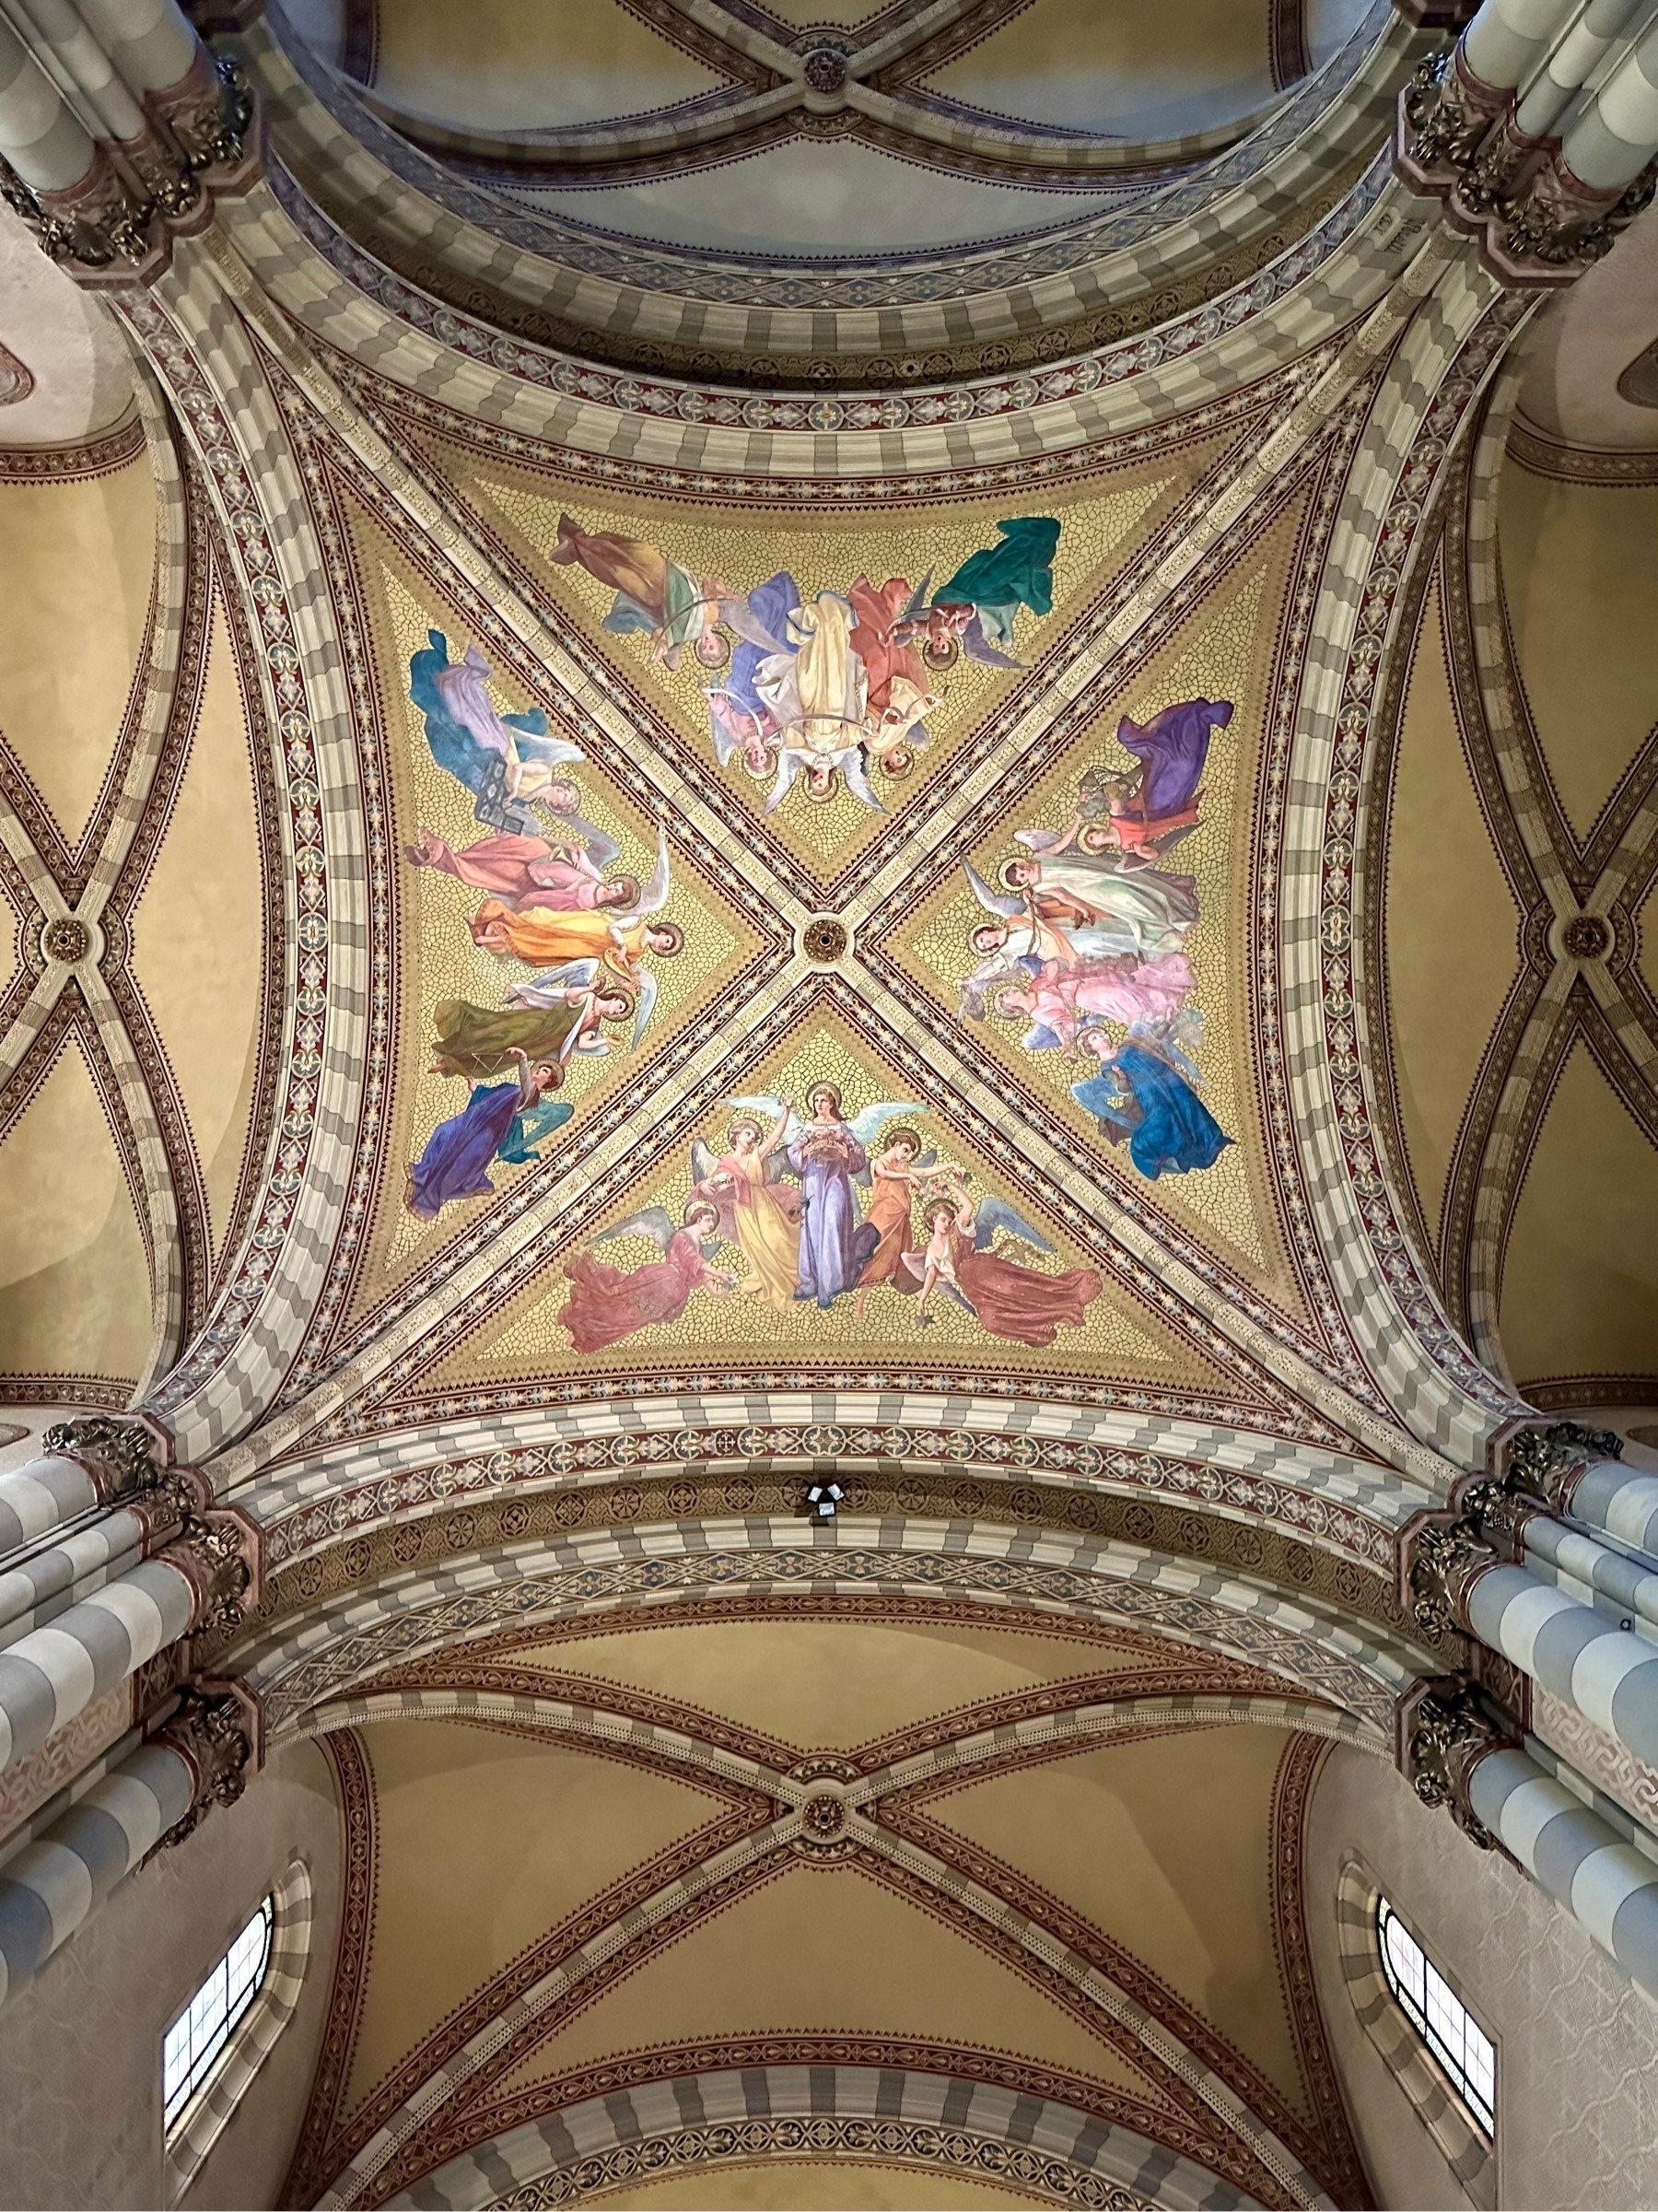 Looking up at a vaulted ceiling fresco, split into four quadrants each containing five figures